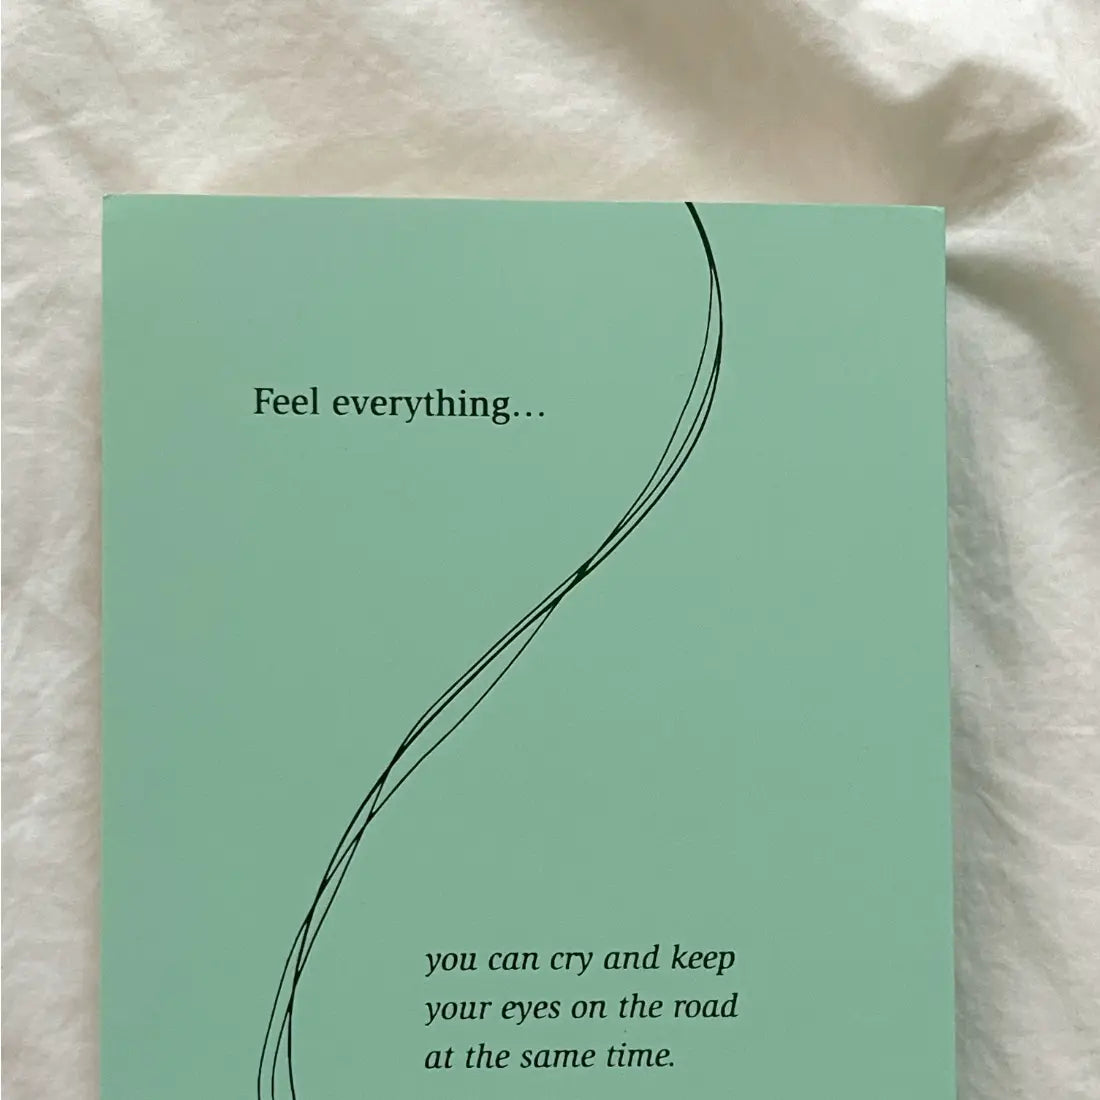 Eyes On the Road - Poetry Book